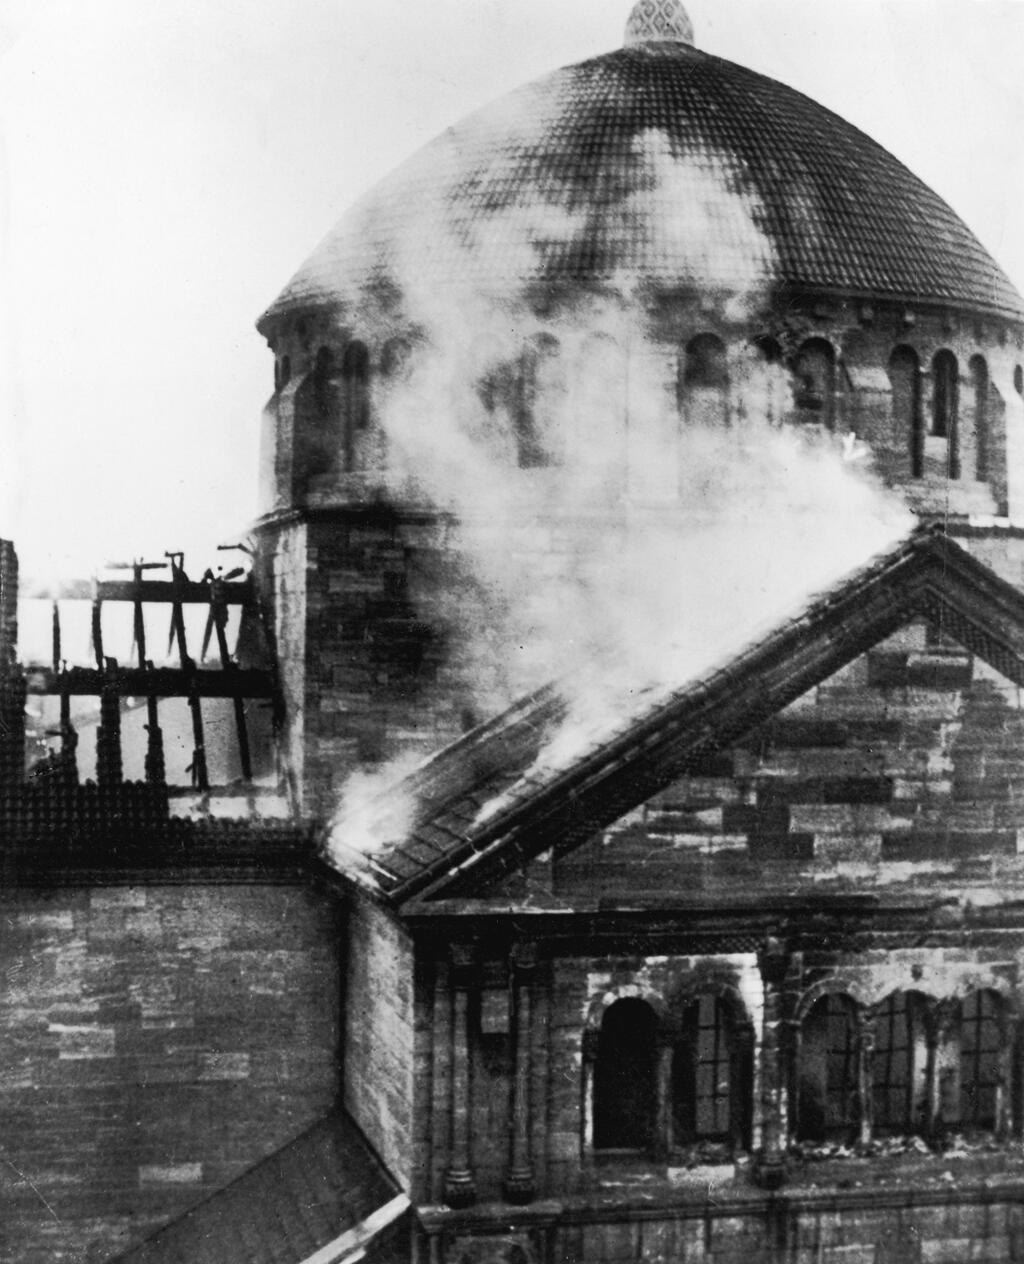 Countless Jewish properties were burned and destroyed in Kristallnacht 